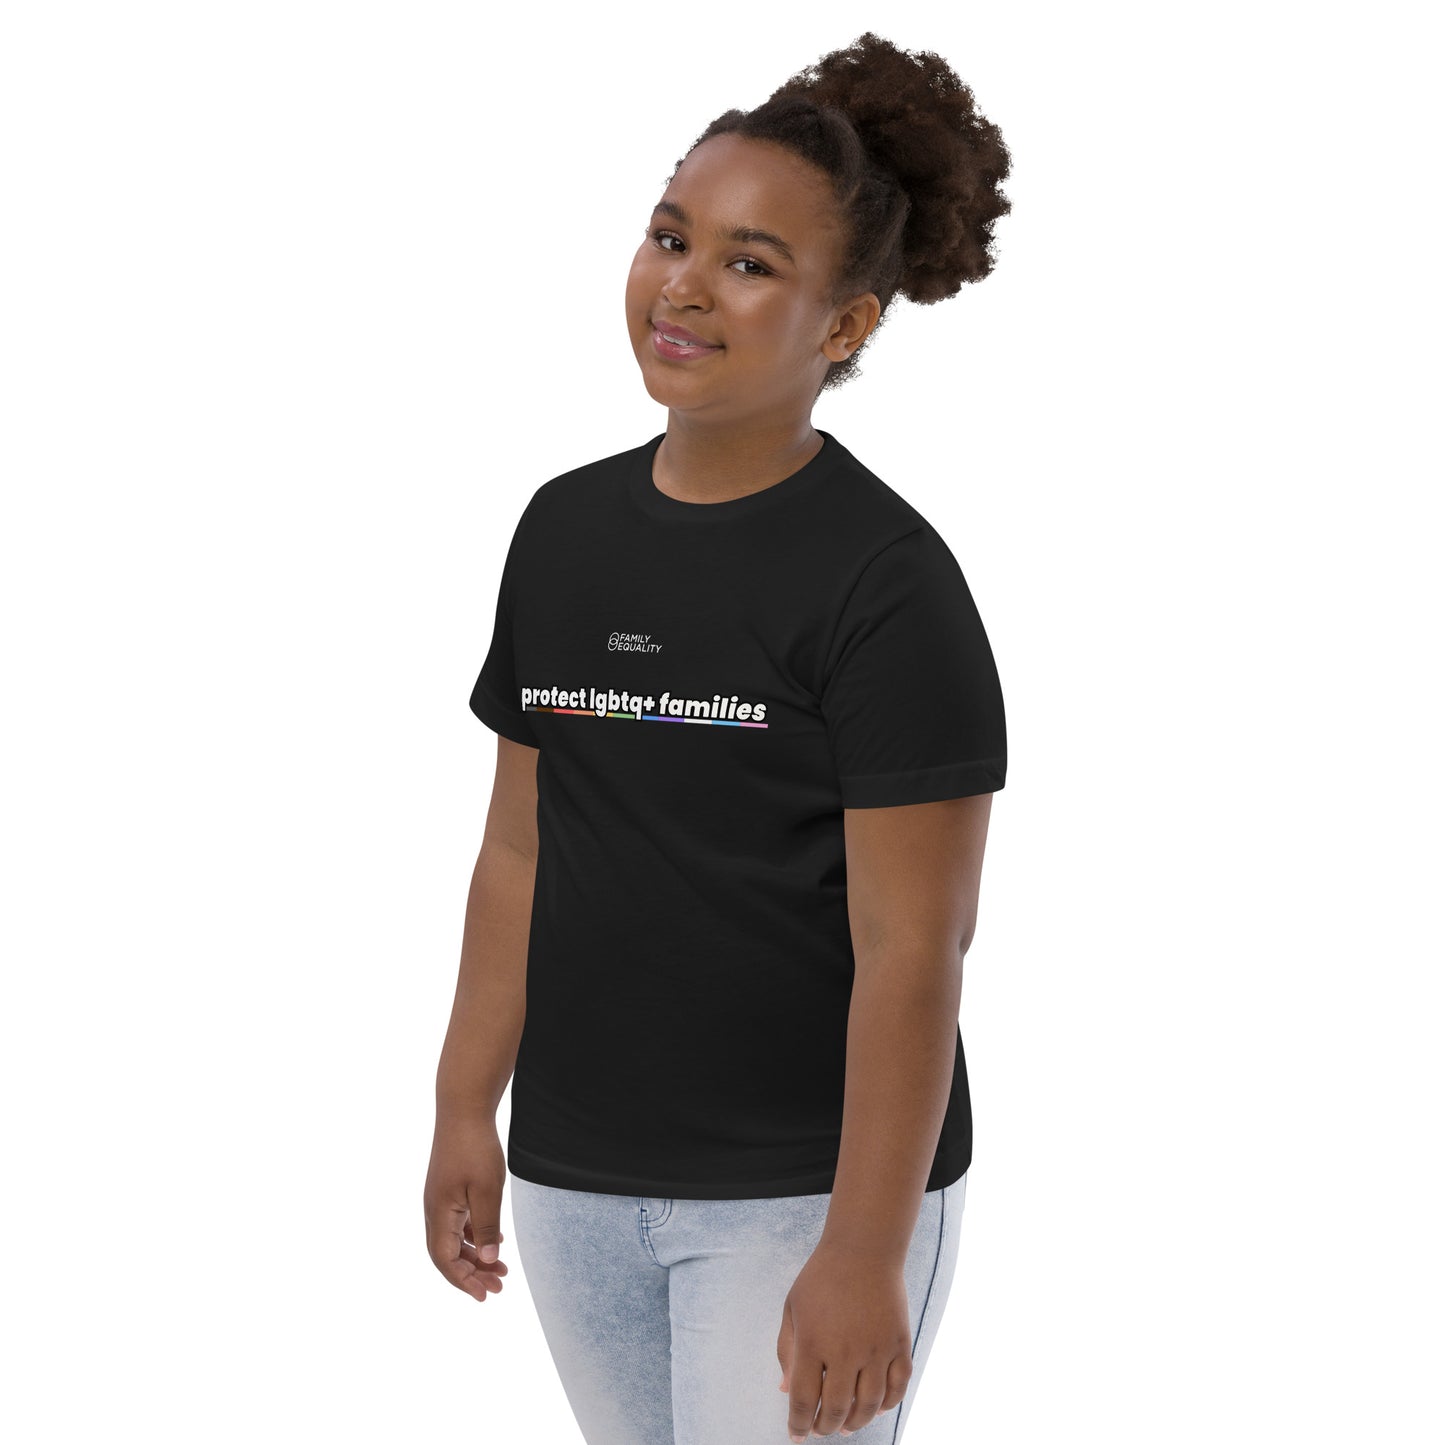 Protect LGBTQ+ Families Youth Tee